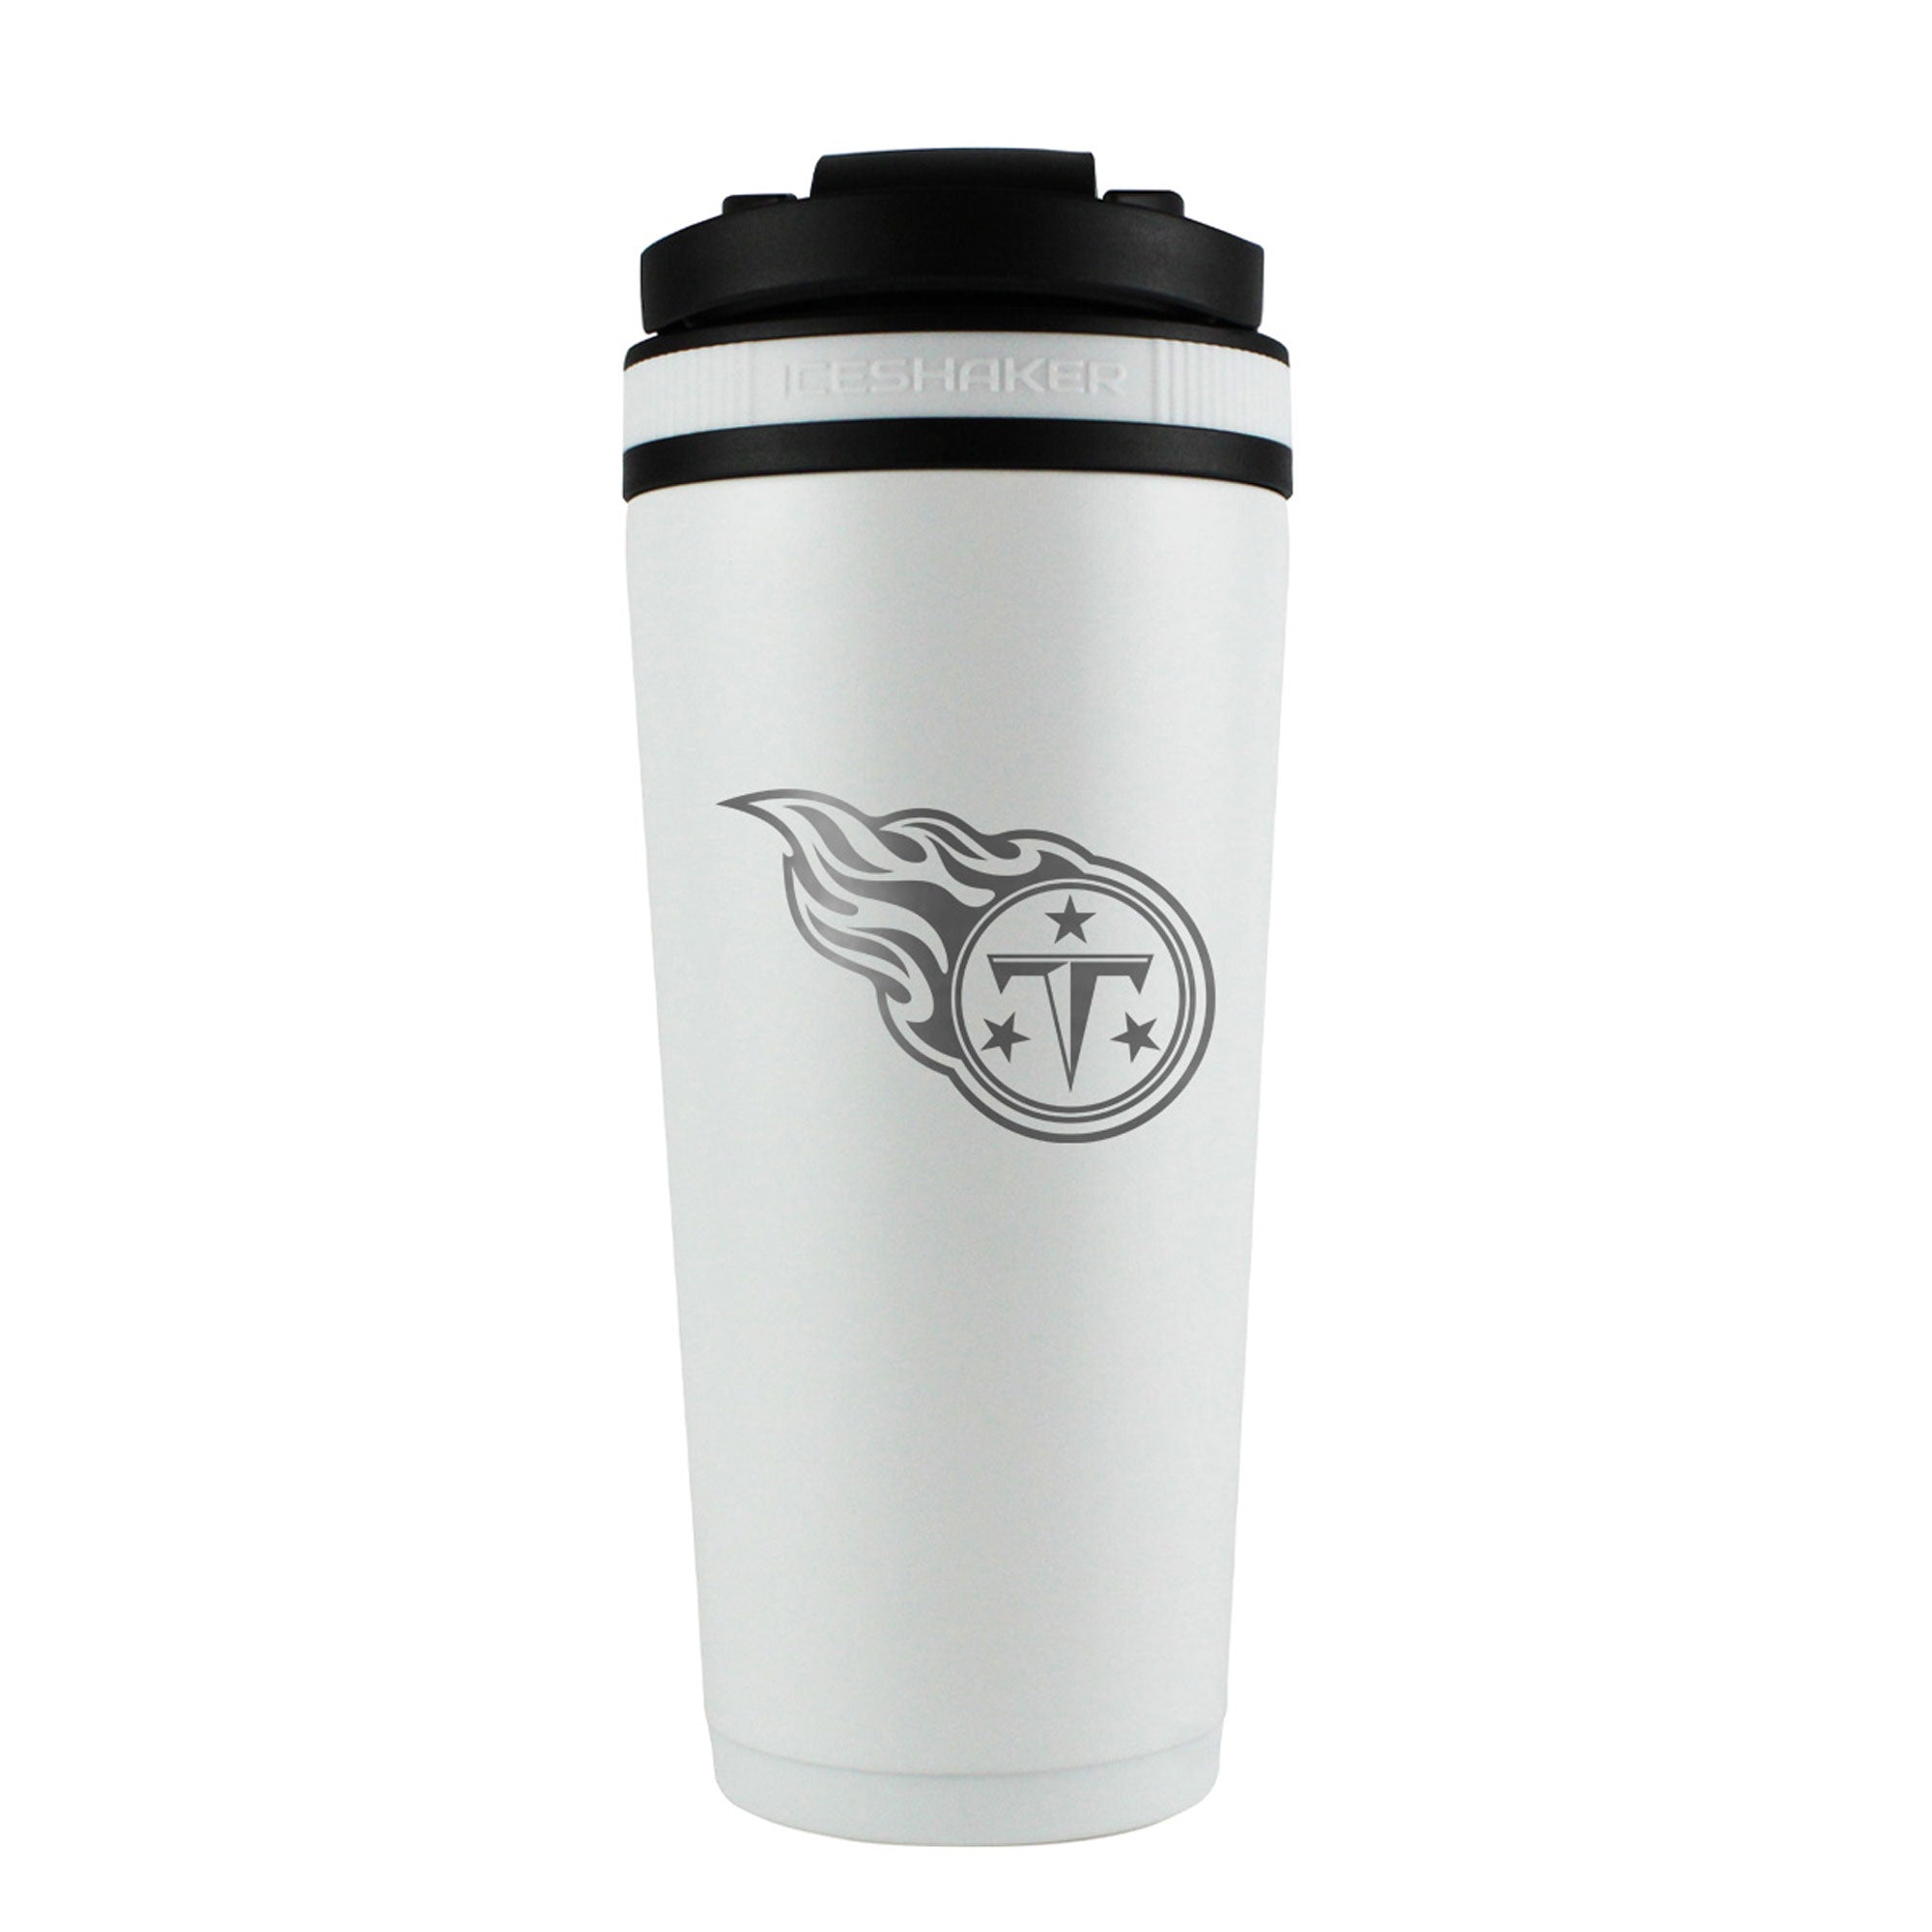 Officially Licensed Tennessee Titans 26oz Ice Shaker - White